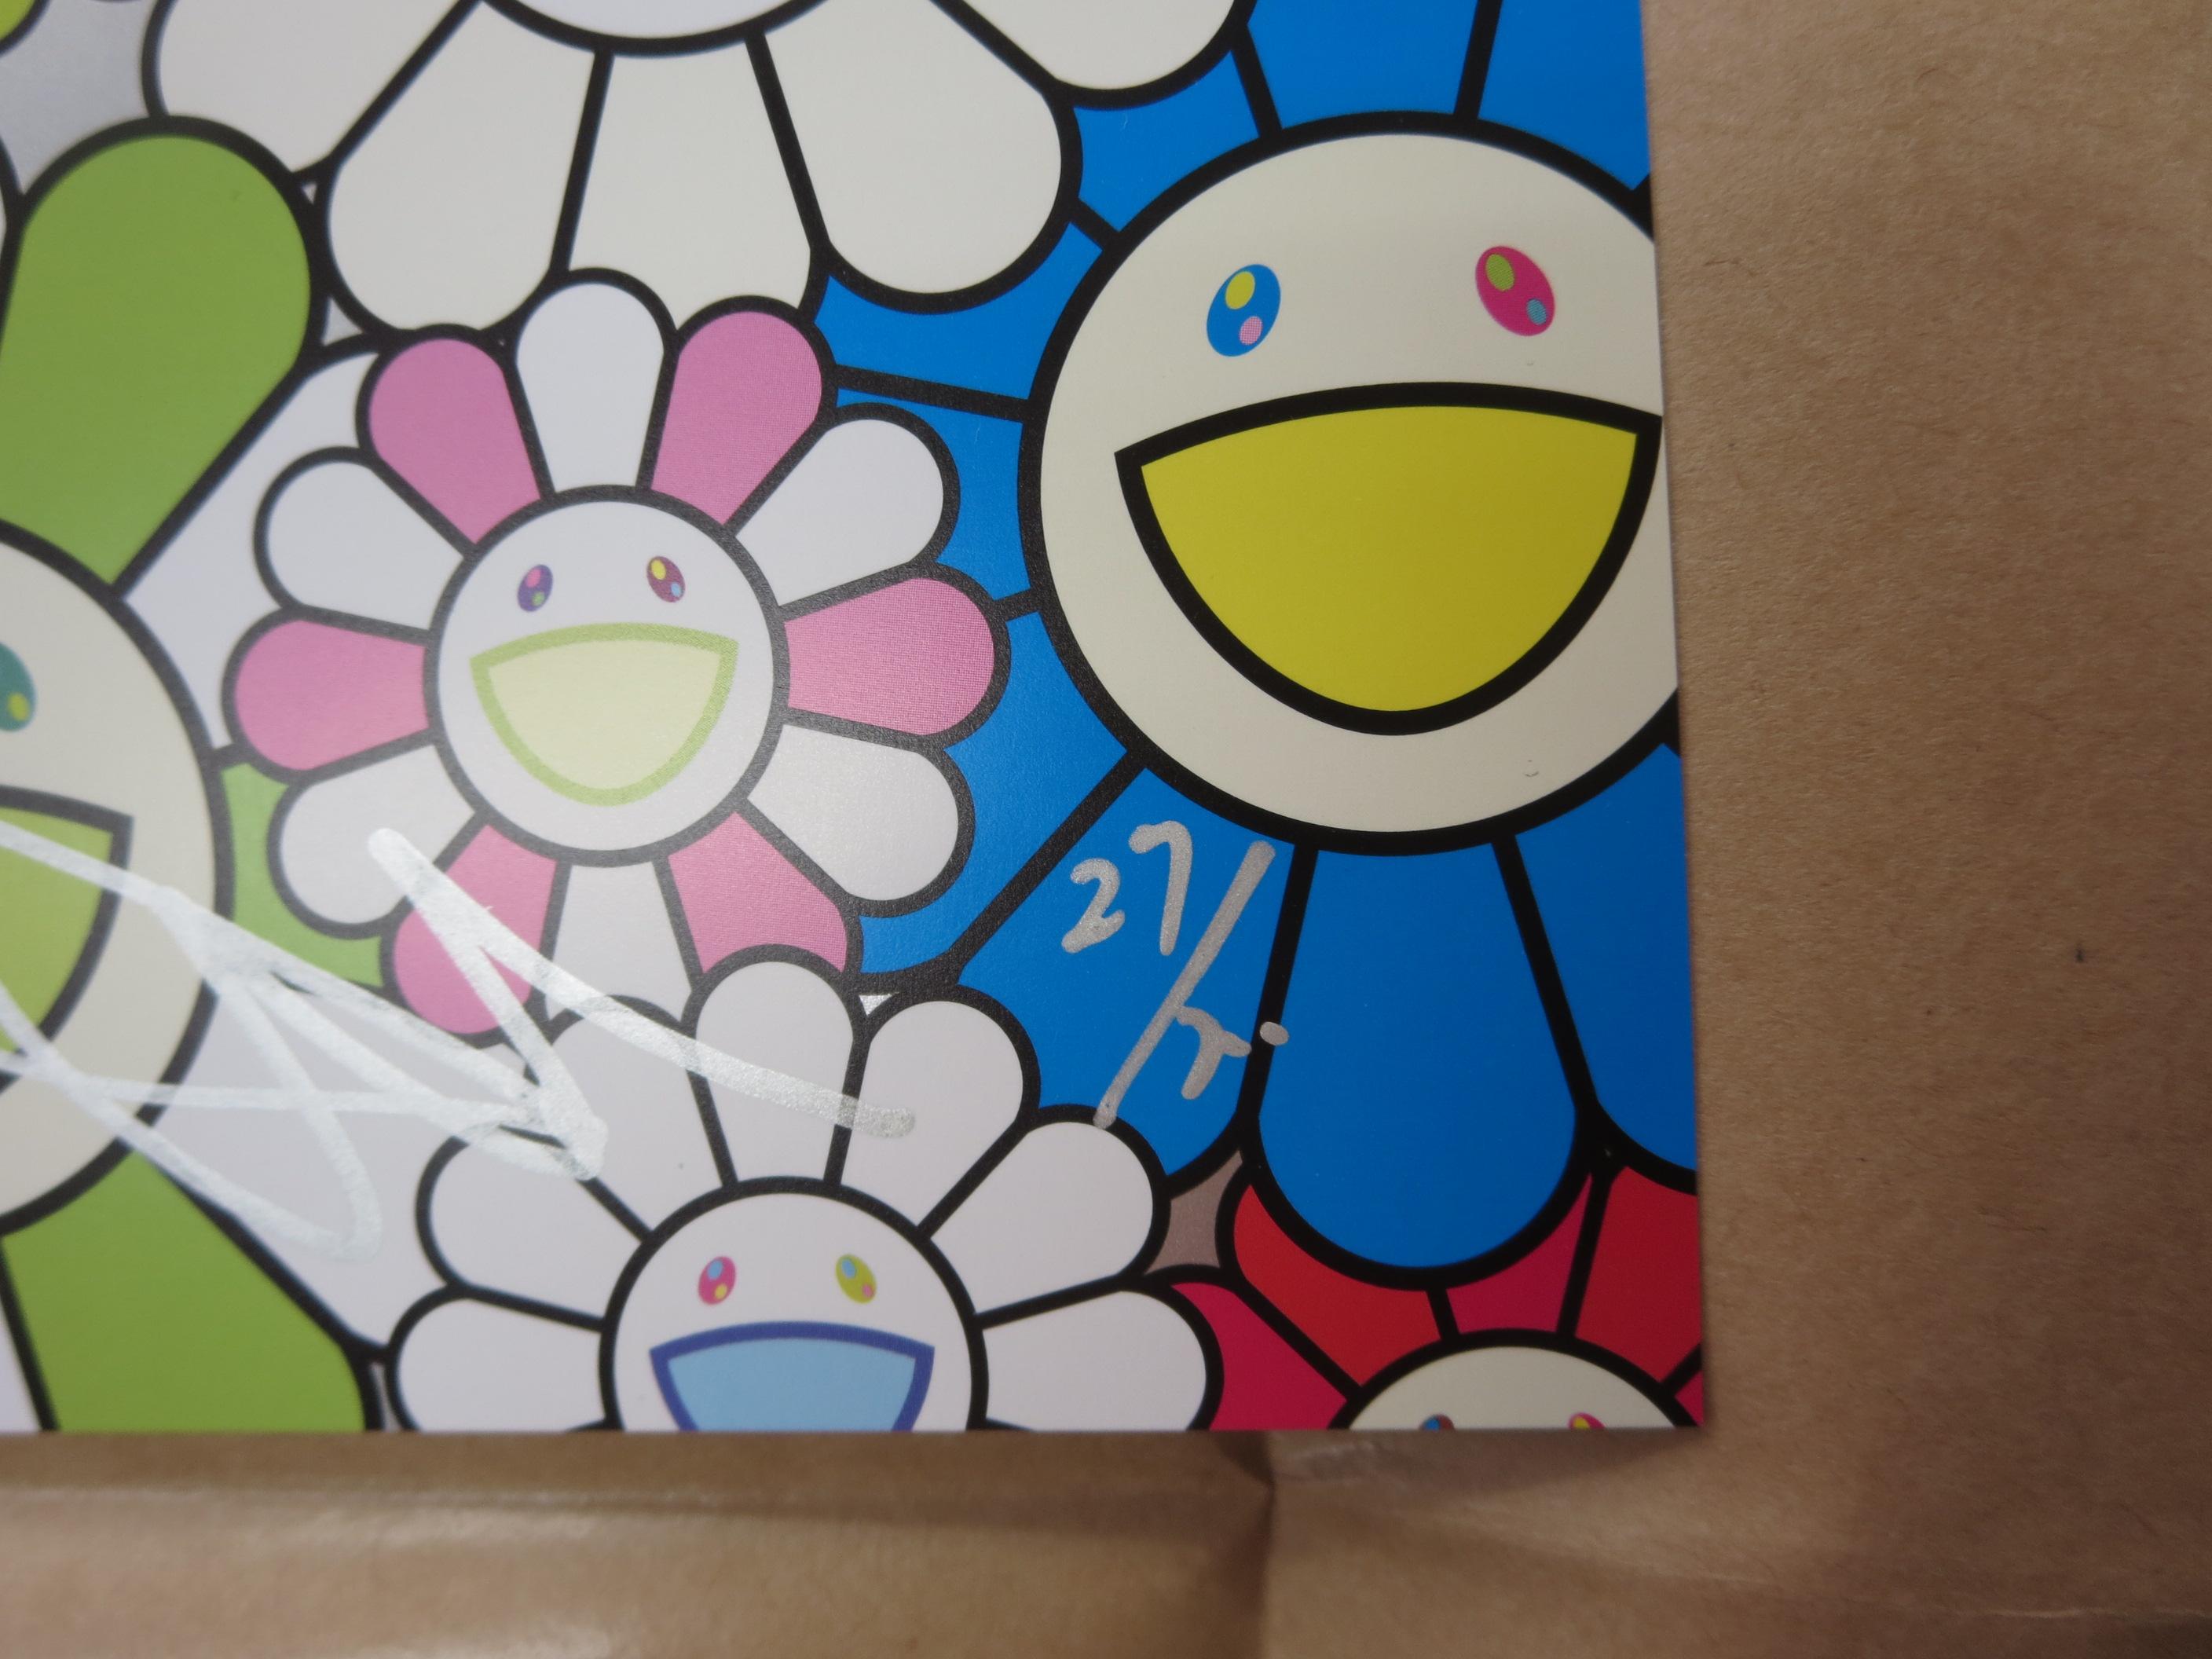 The nether world Limited Edition (print) by Takashi Murakami signed and numbered 1